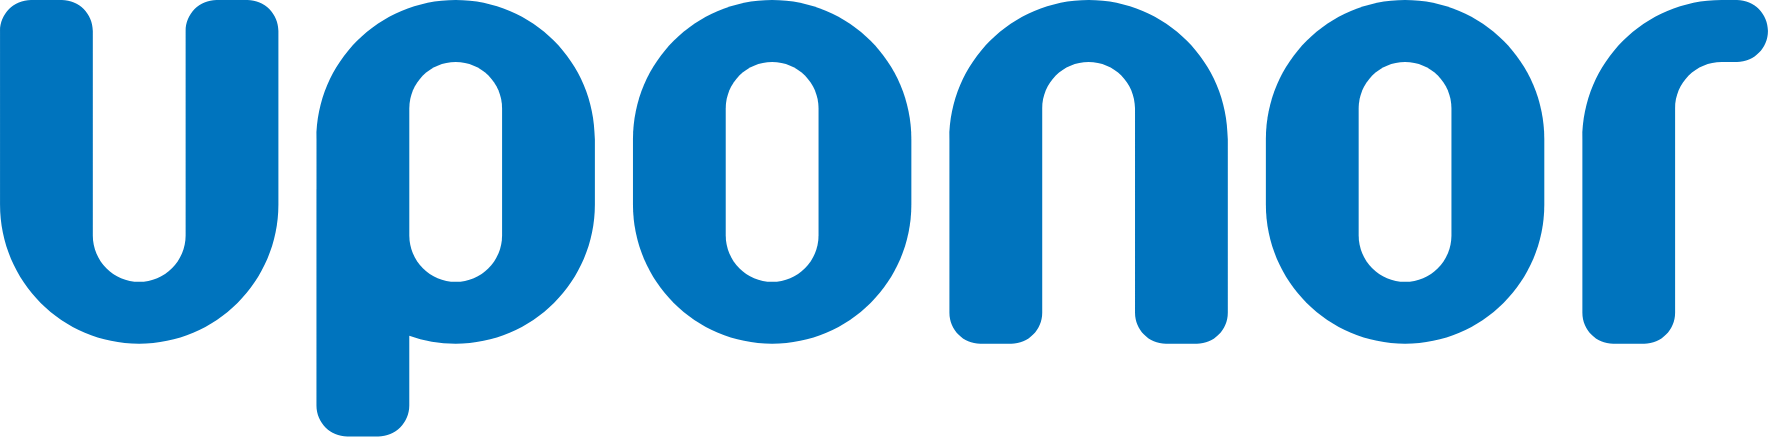 Uponor logo large (transparent PNG)